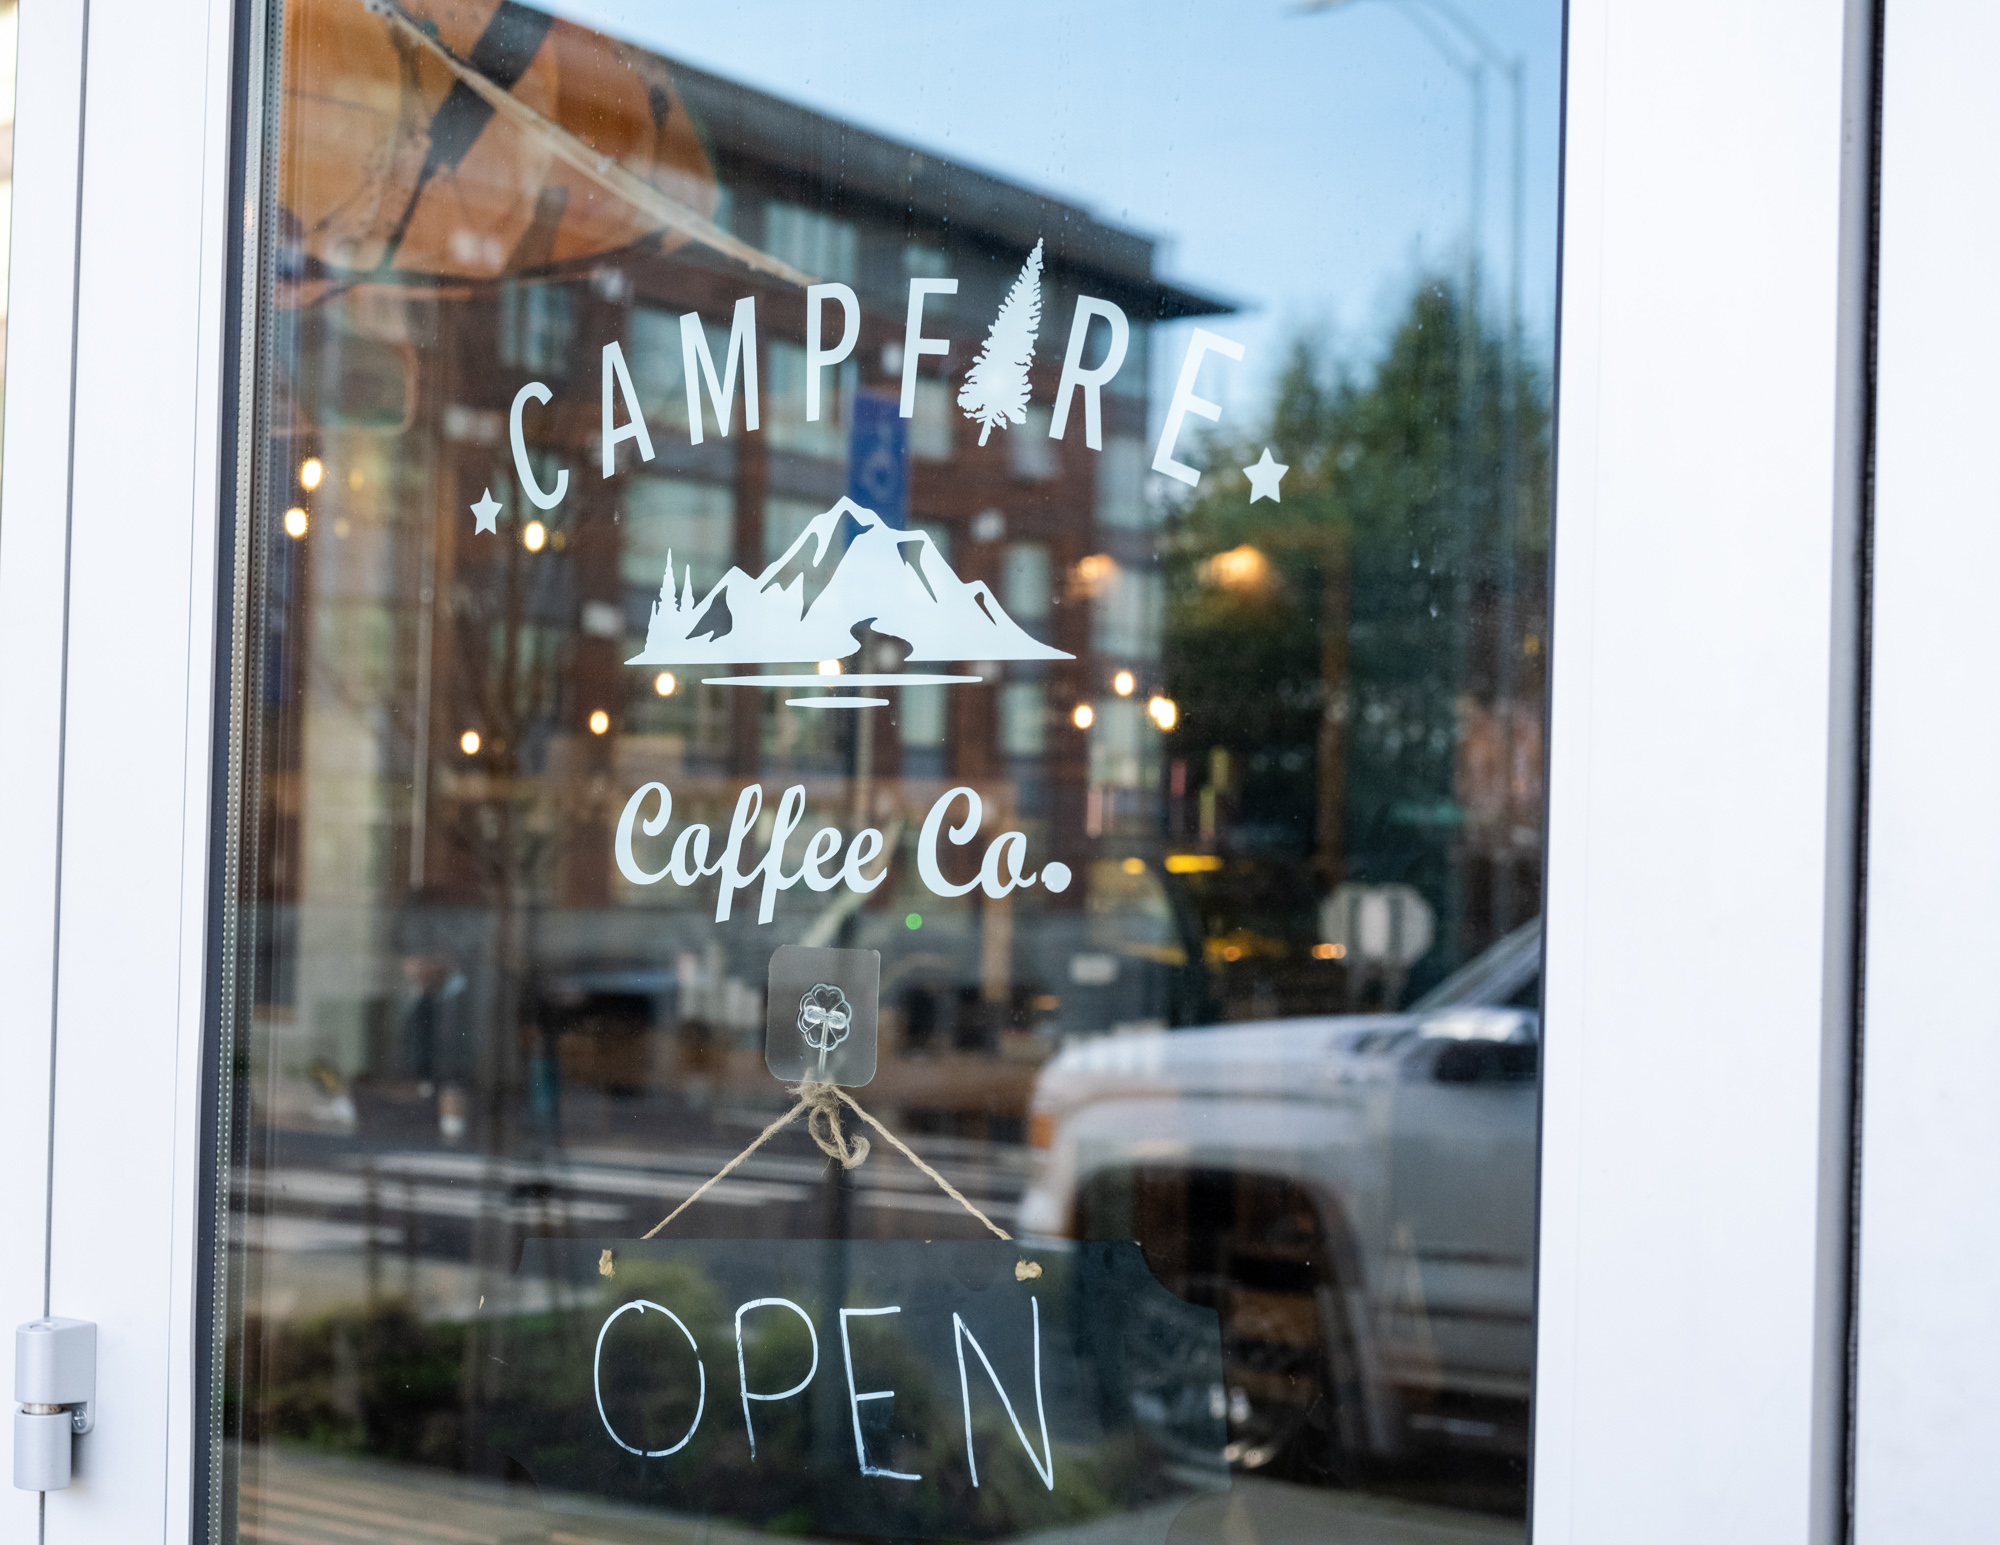 A glass door with the Campfire Coffee logo